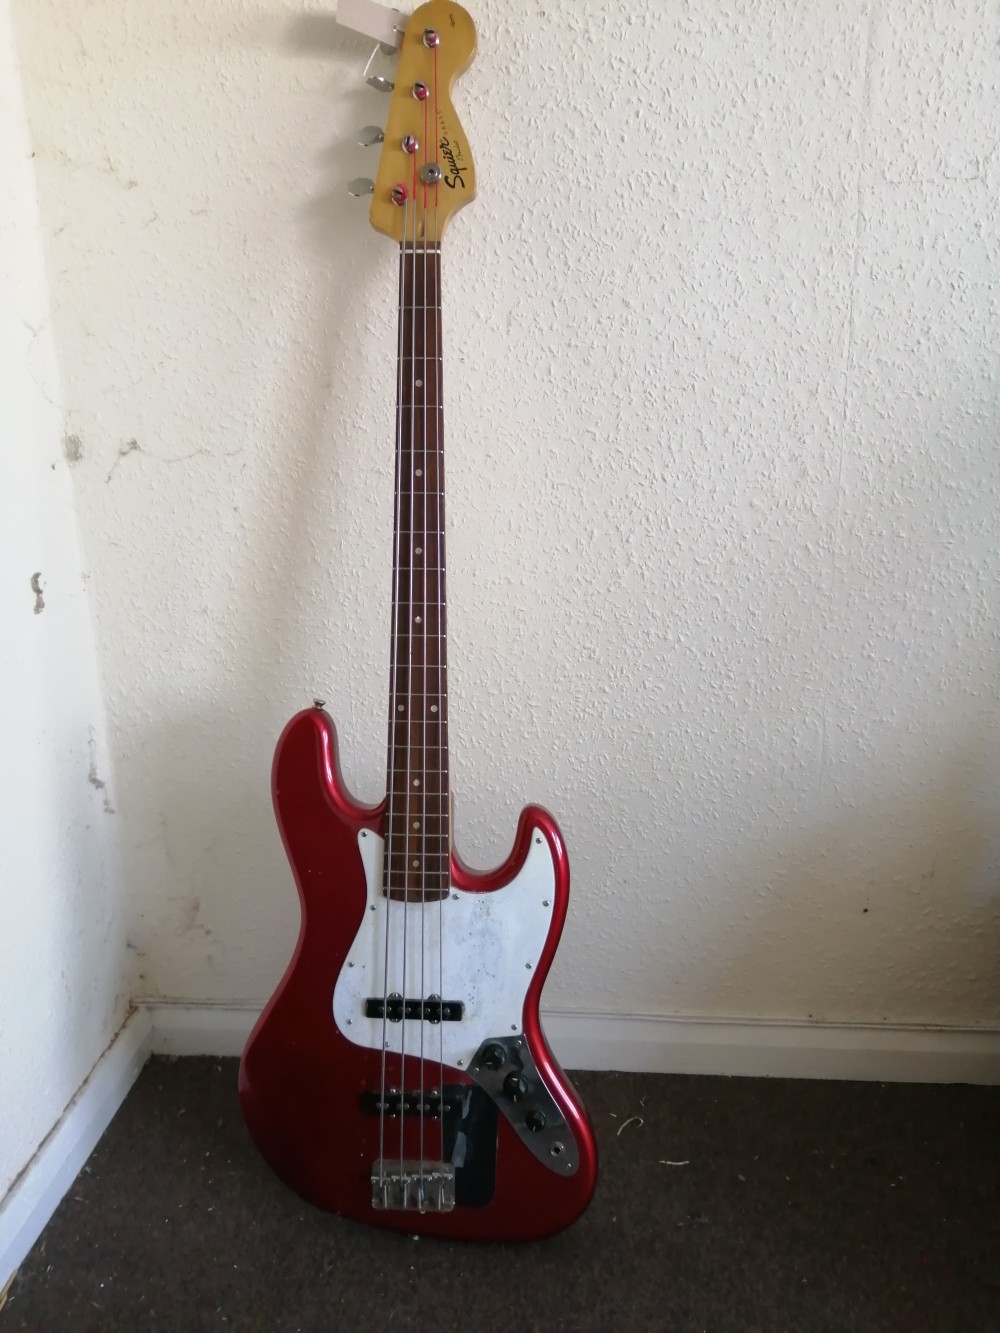 A Squier J-Bass Affinity series guitar